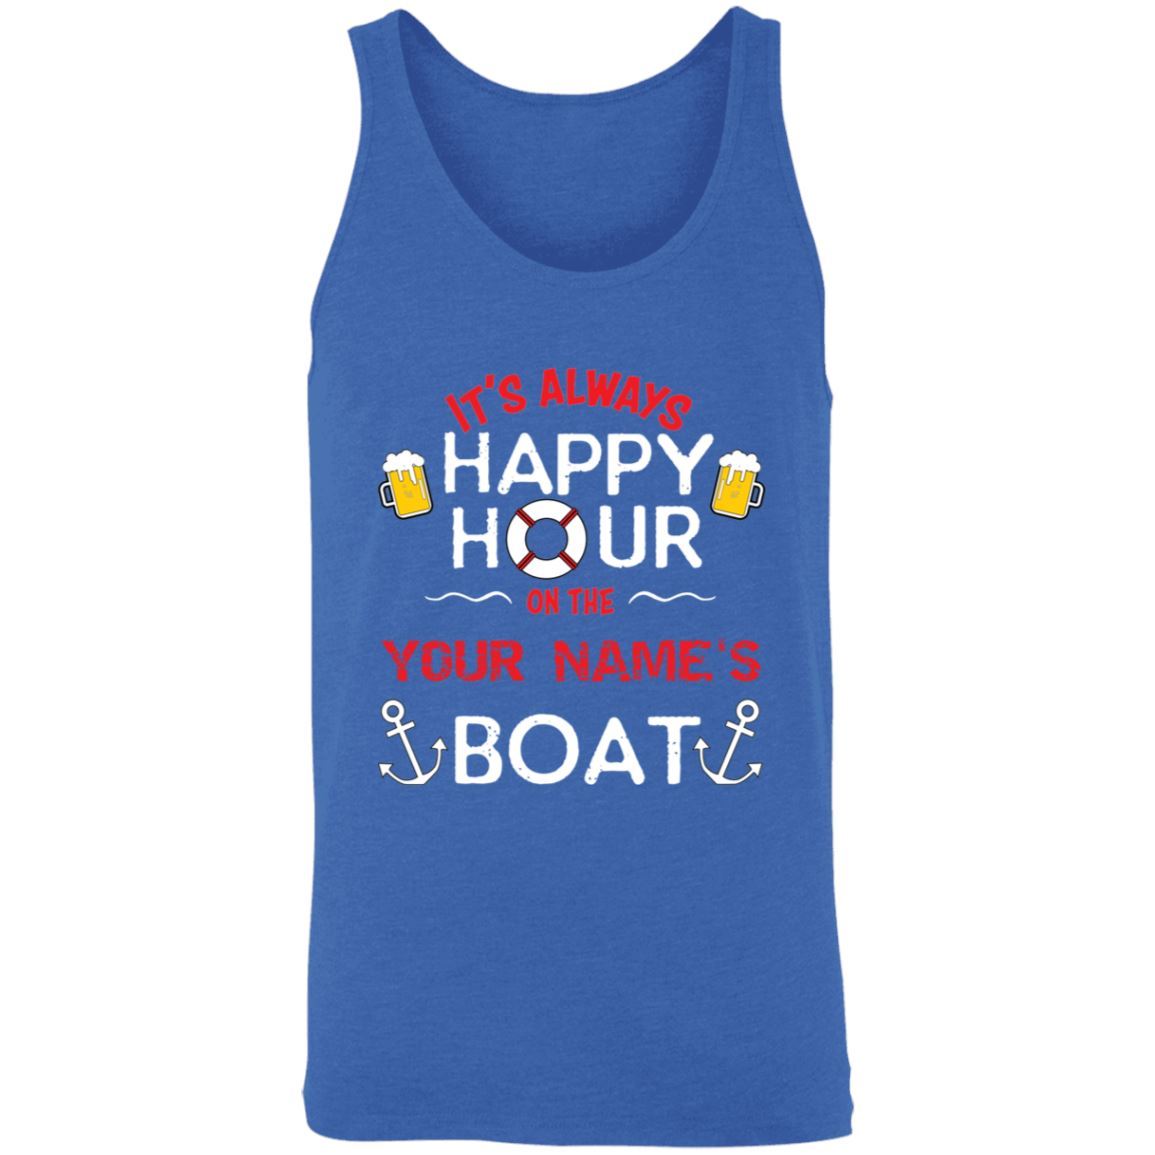 It's Always Happy Hour On Your Boat Premium Unisex Tank (Made in the USA 🇺🇸 ) - Houseboat Kings